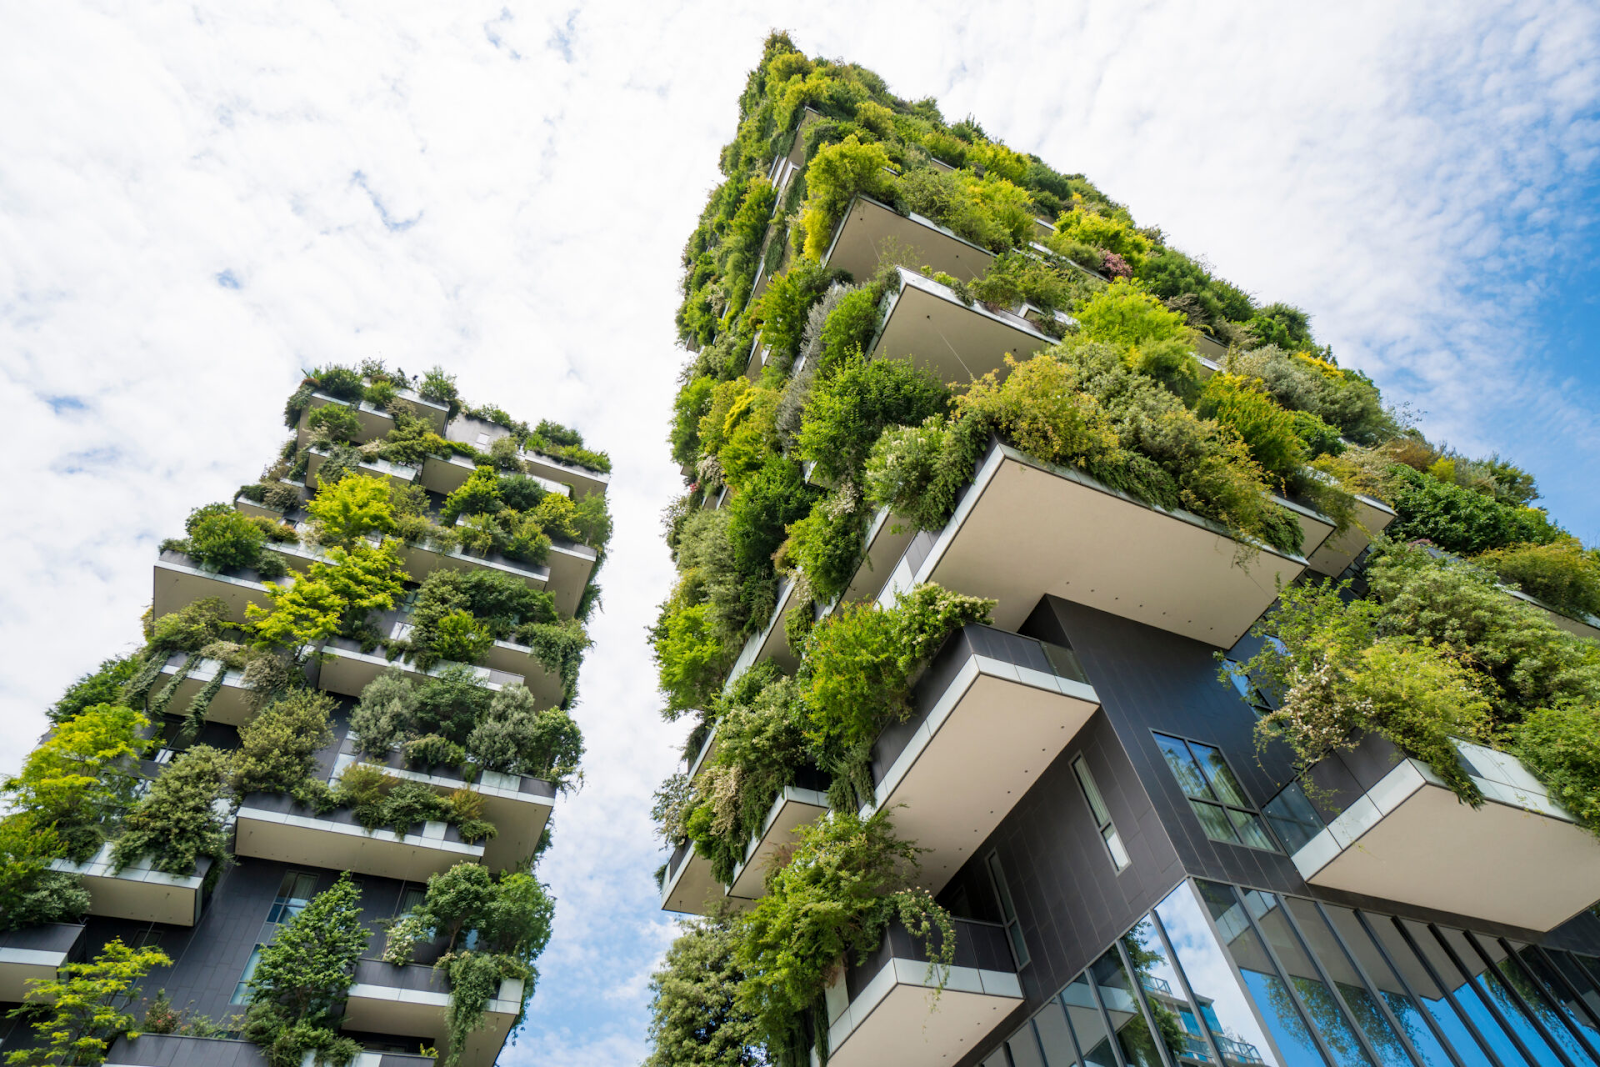 Sustainable green buildings with lush plants 